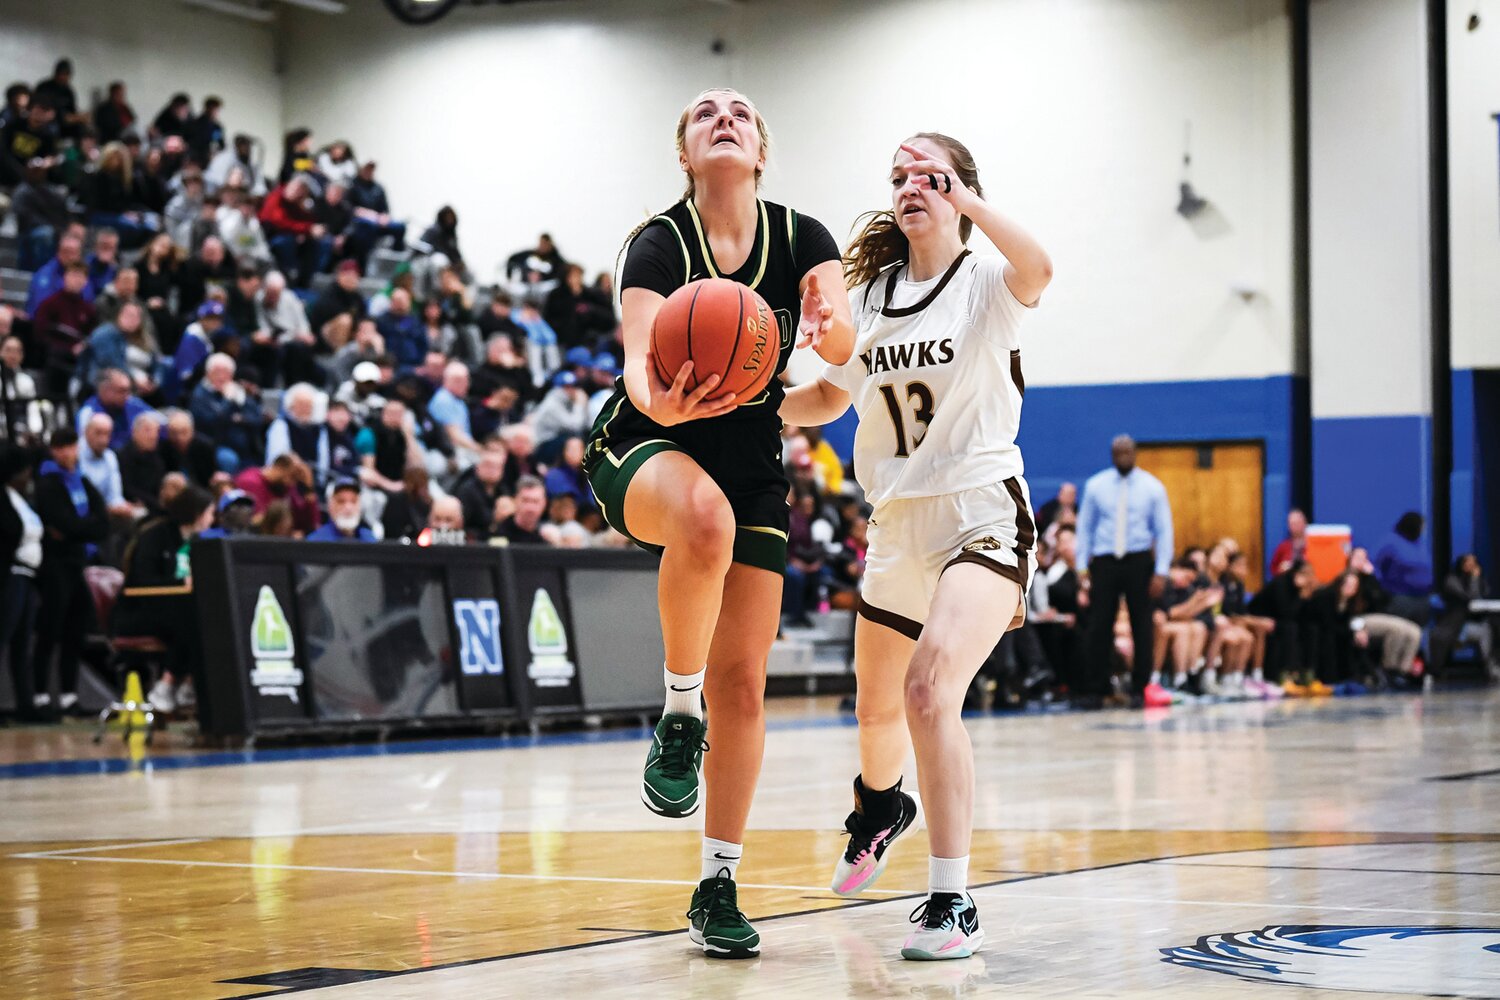 Archbishop Wood’s Sophia Topakas drives past Bethlehem Catholic’s Kendall Nickischer in the fourth quarter for an easy two points.